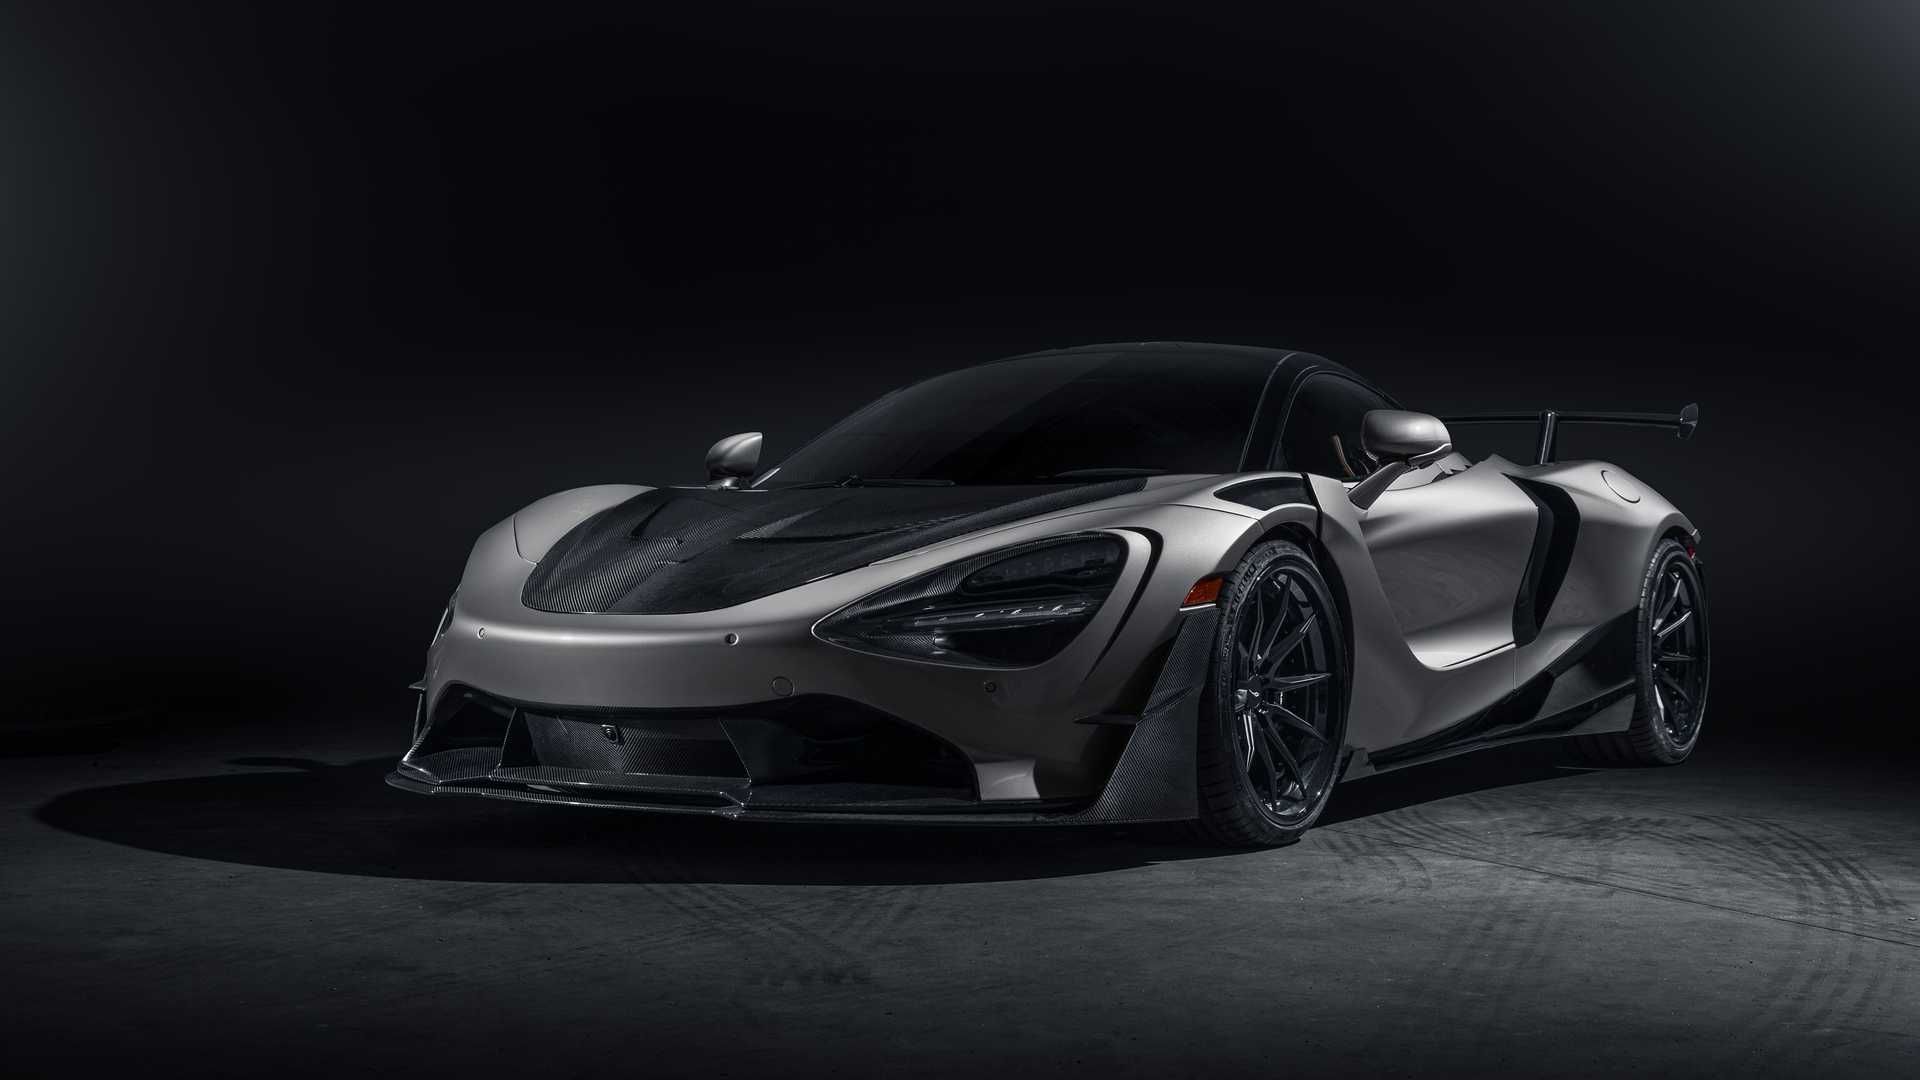 2021 Check Out All The Carbon Fiber On This McLaren 720S by SWAE